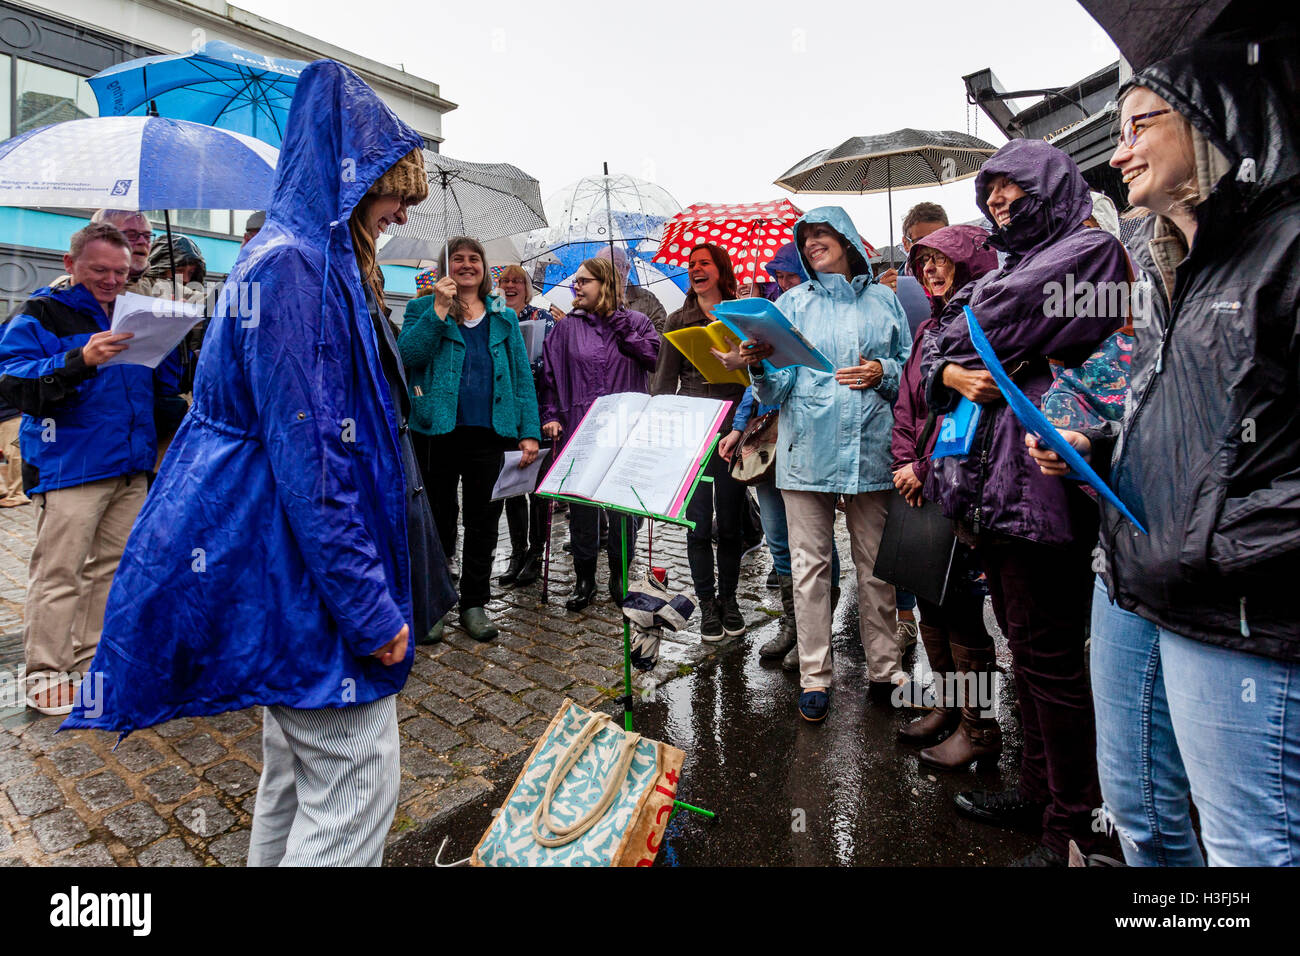 A Community Choir Performing In The Rain, The High Street, Lewes, Sussex, UK Stock Photo